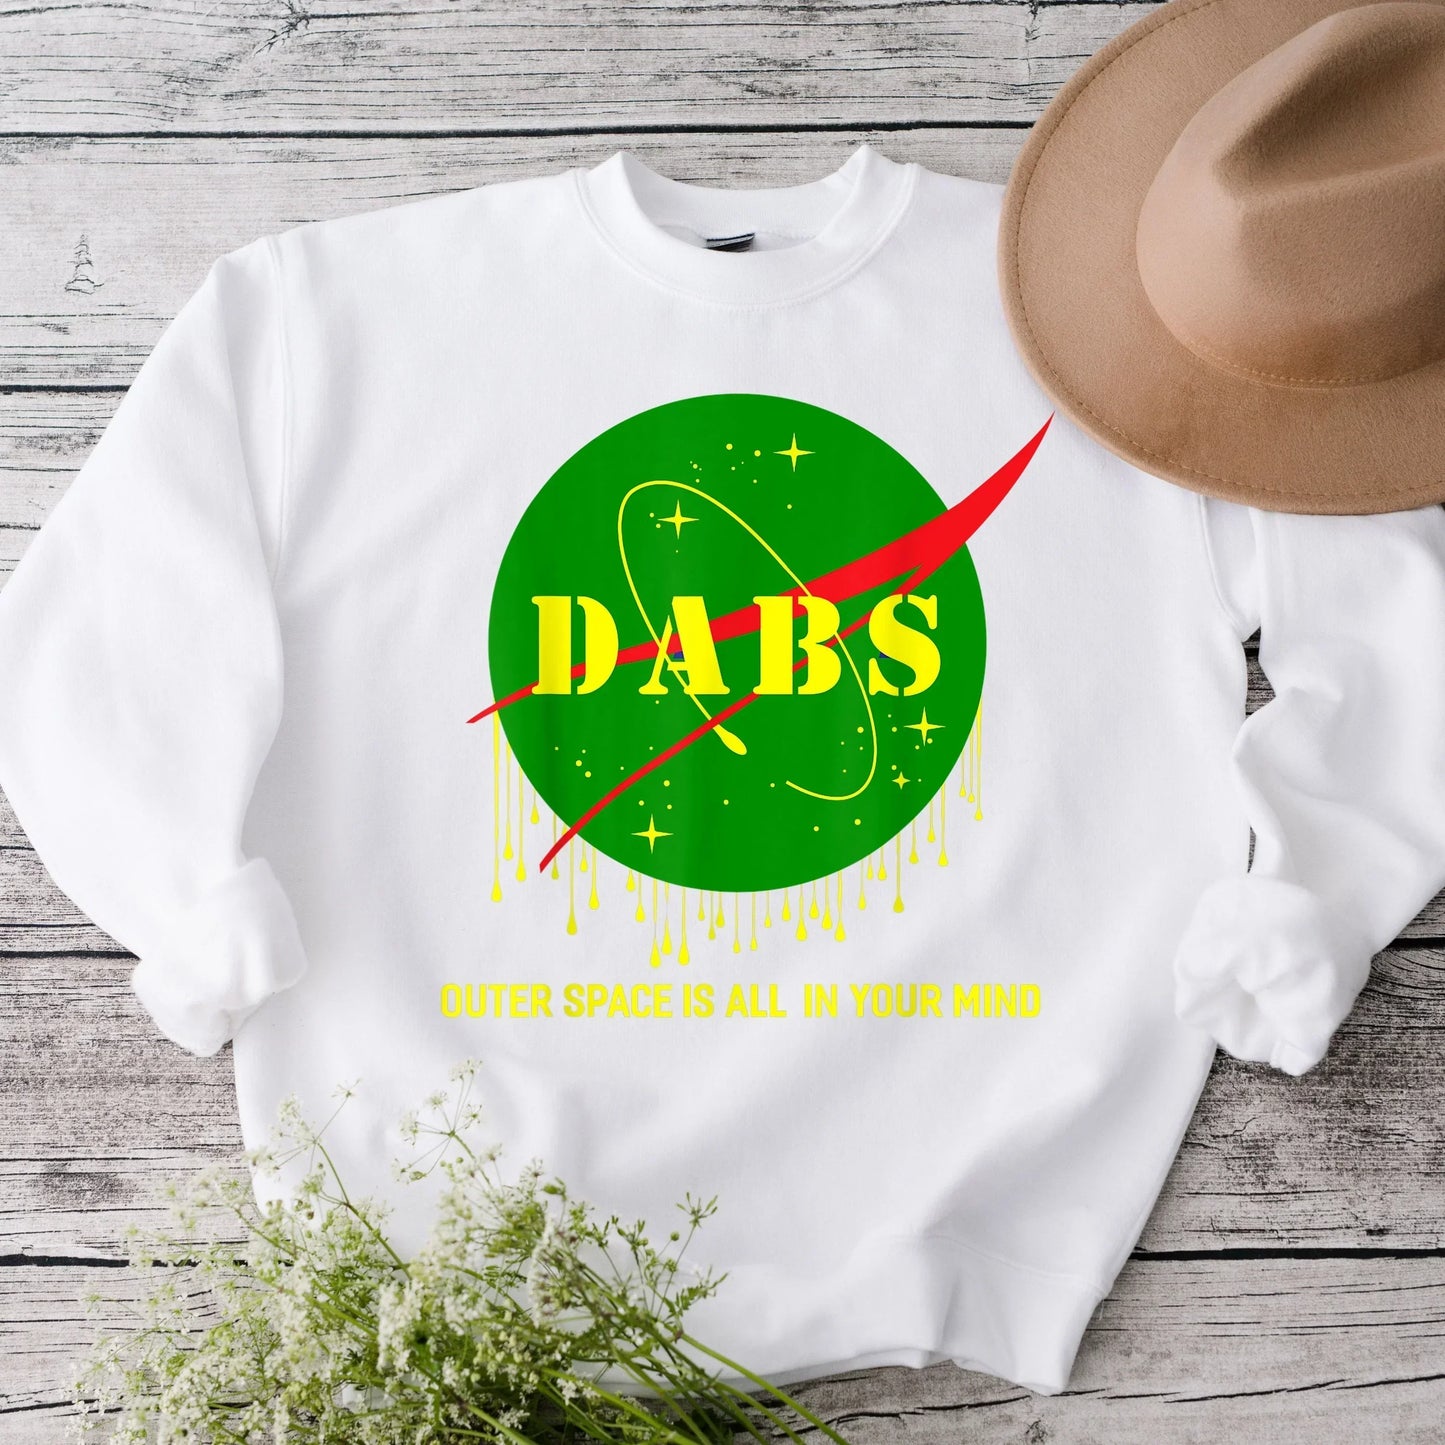 Dabs Outer Space is All In Your Head, Funny Stoner Shirt HMDesignStudioUS